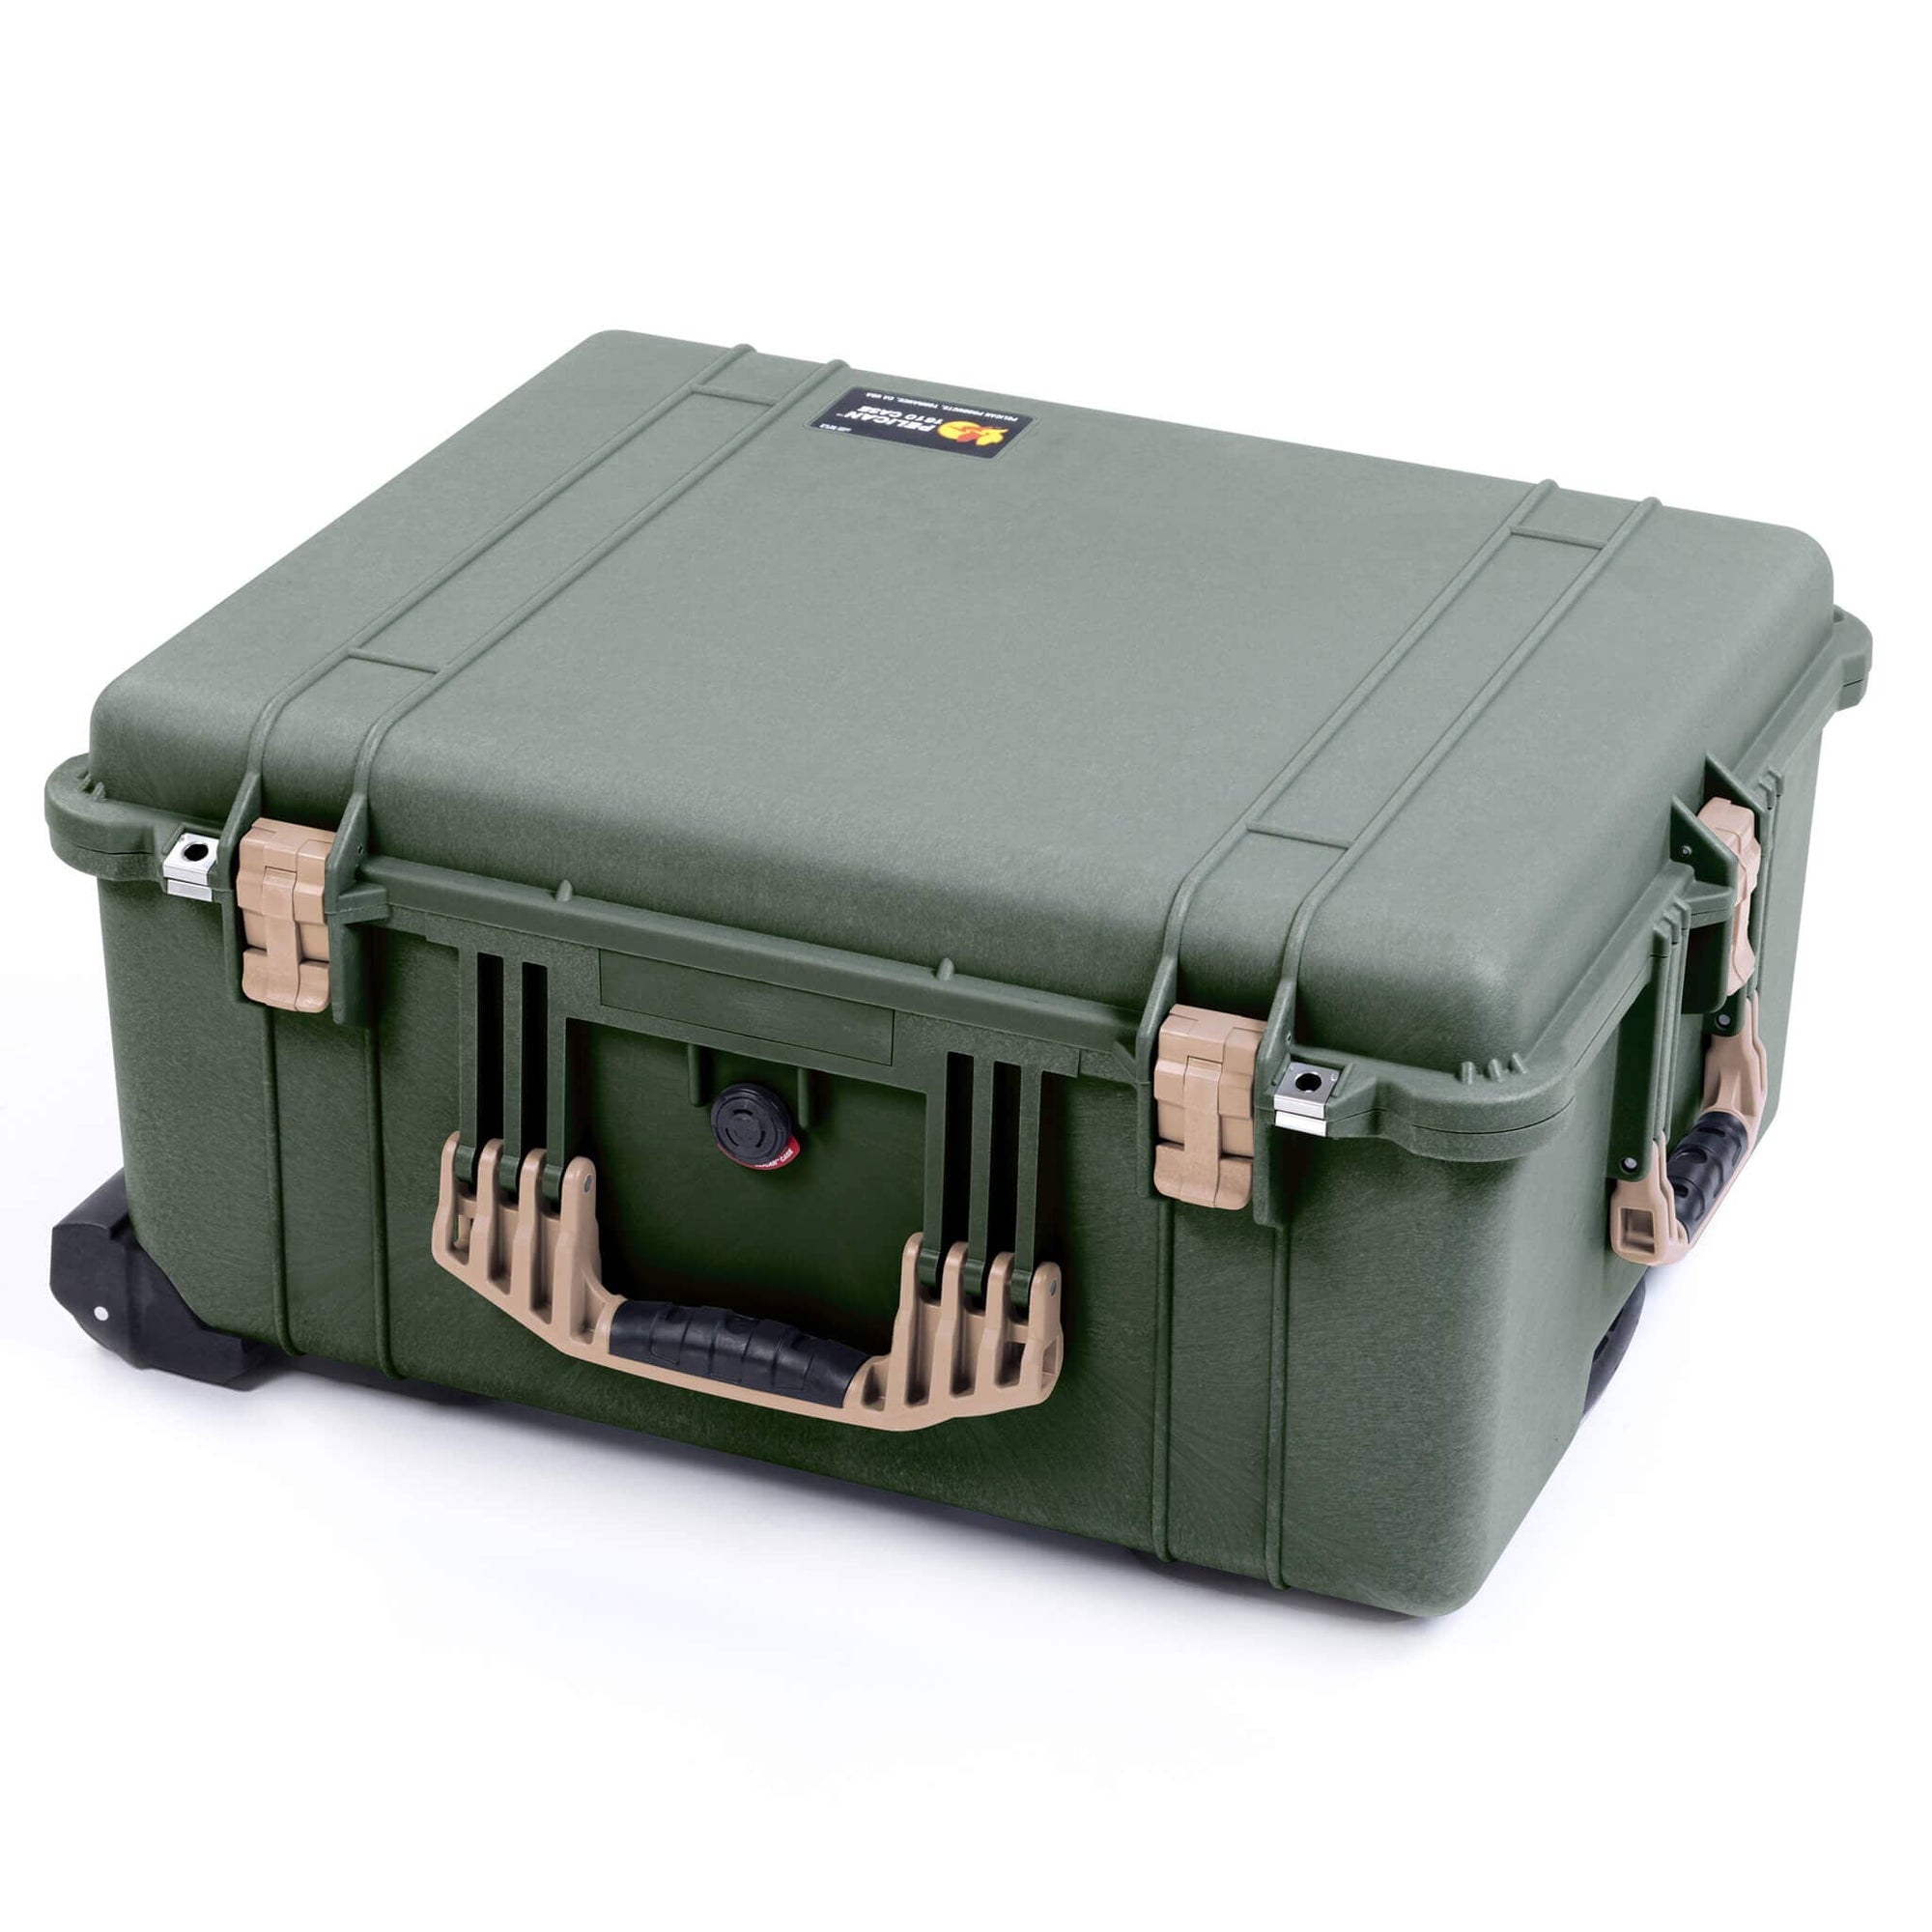 Pelican 1610 Case, OD Green with Desert Tan Handles and Latches ColorCase 